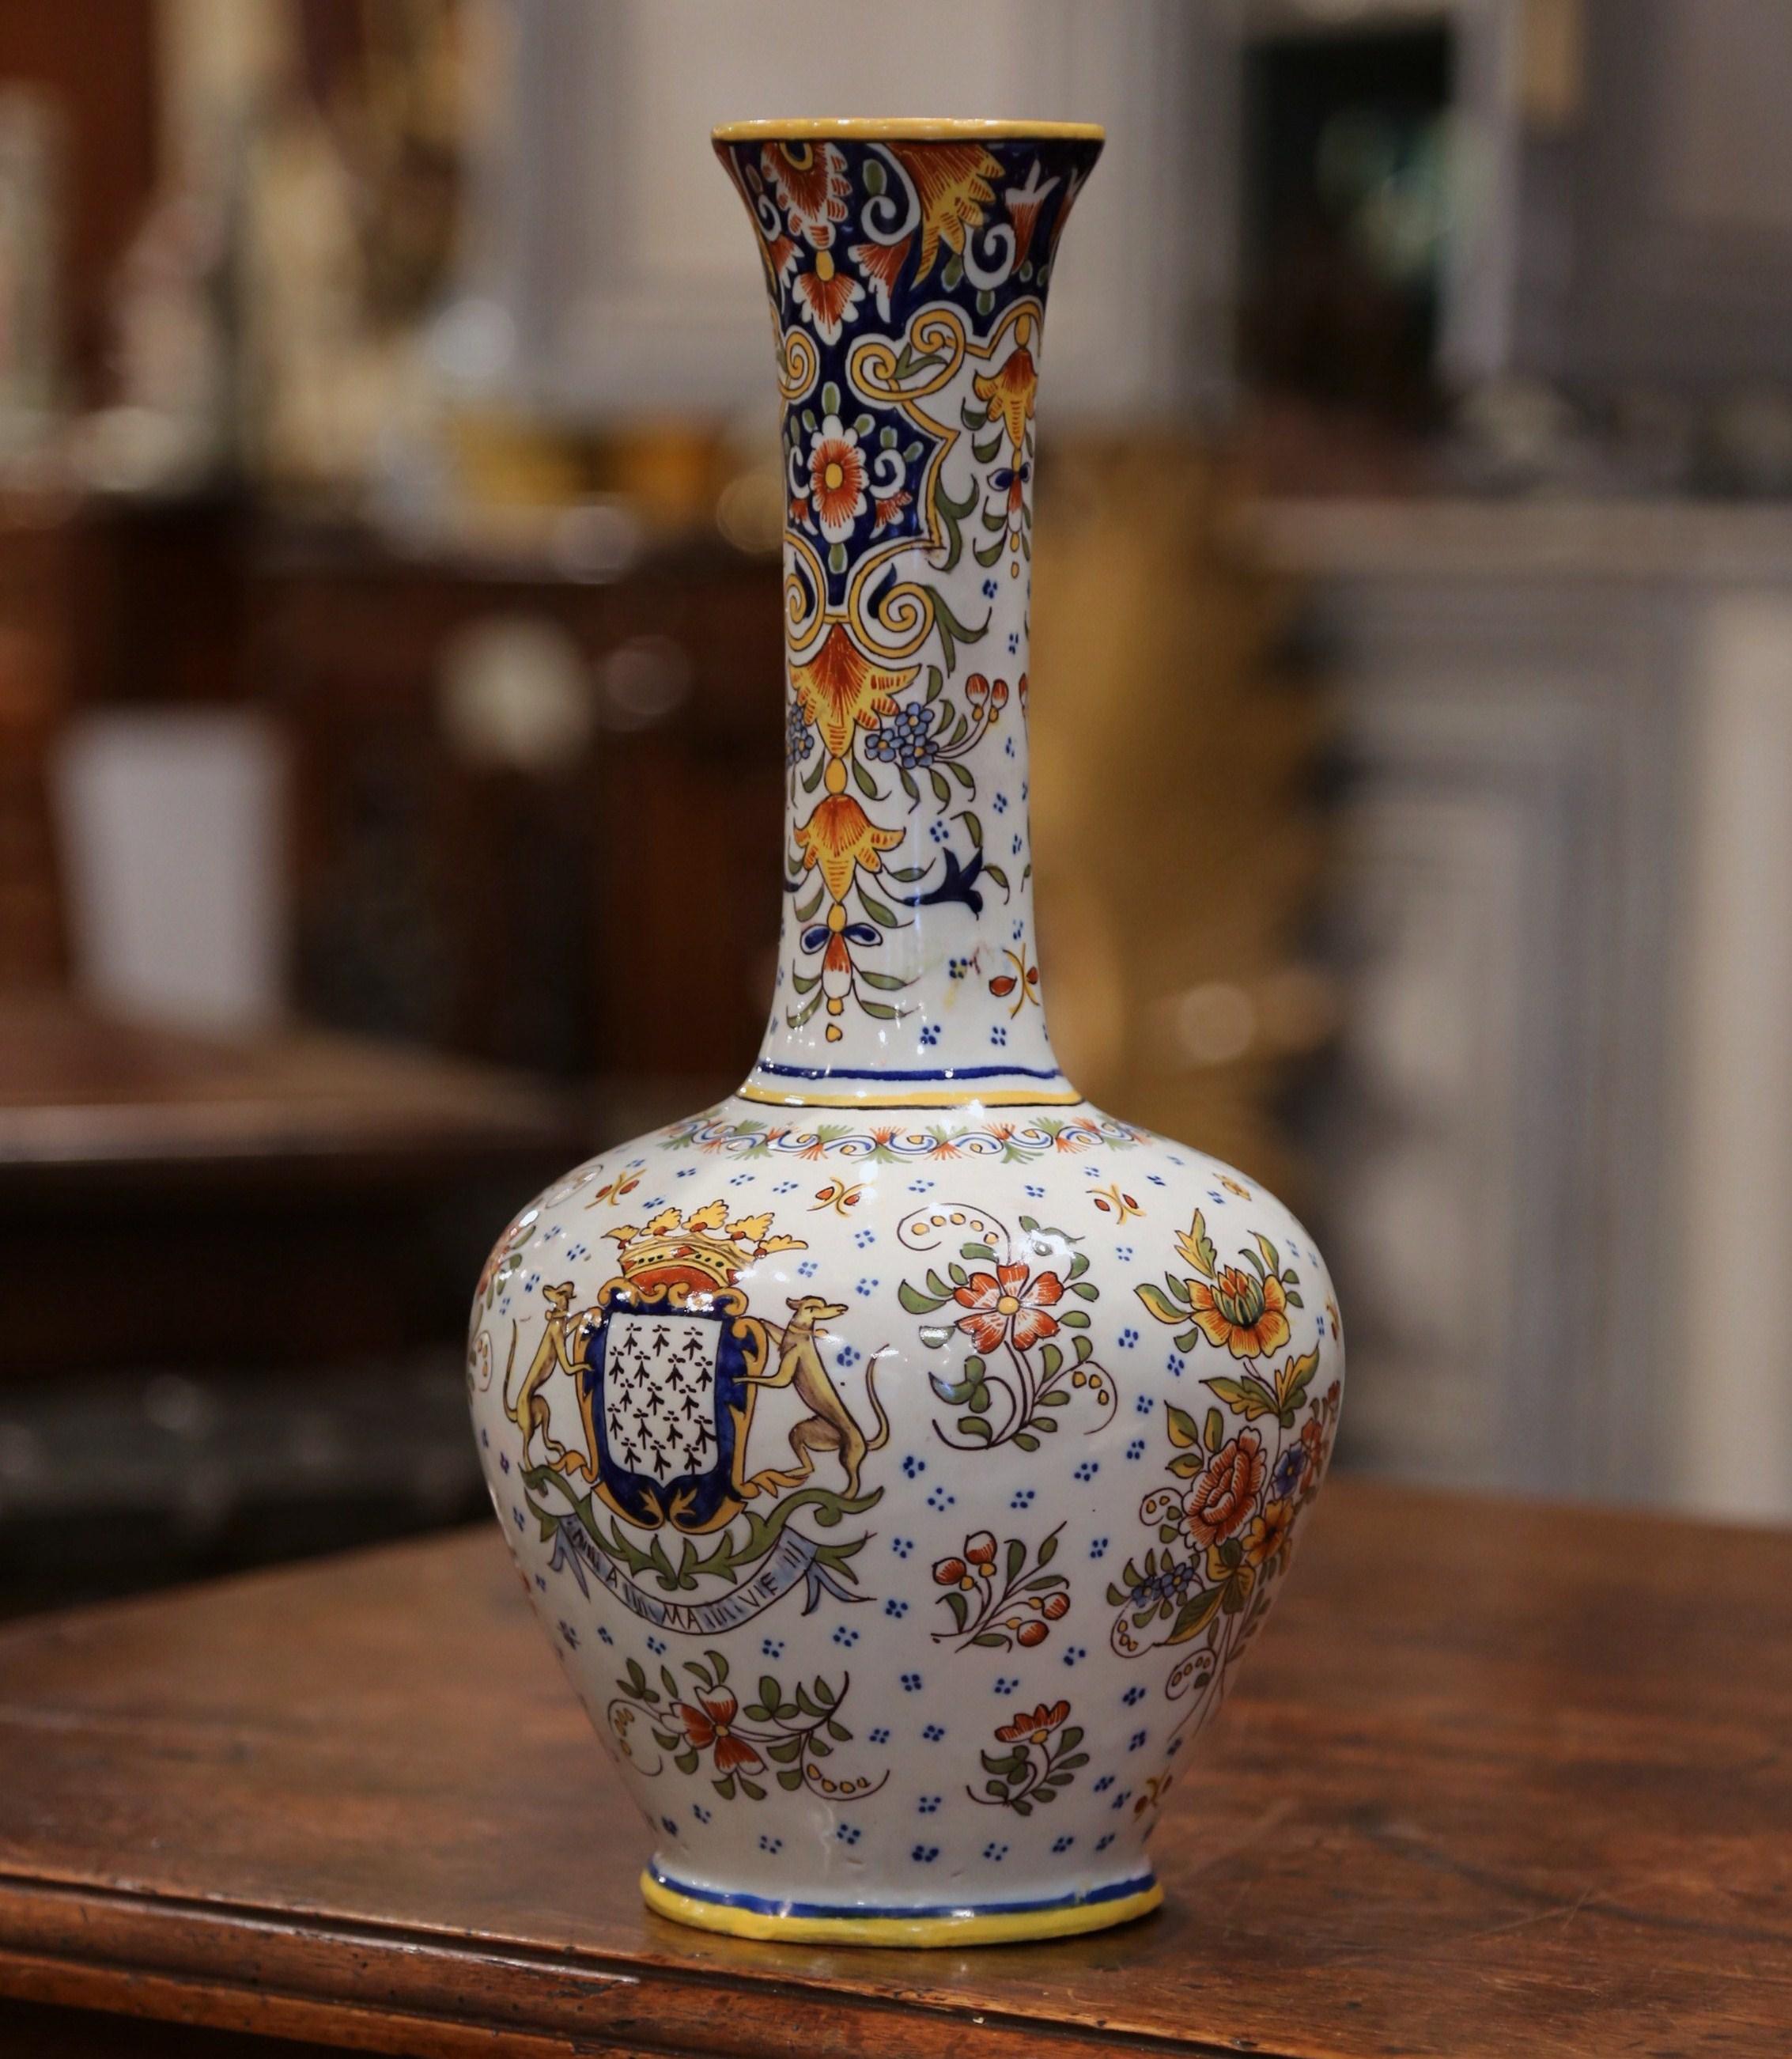 This elegant, colorful, ceramic vase was crafted in Brittany, France, circa 1880. The round, faience vase has a long neck and features decorations that include flowers and leaves. The traditional porcelain vase is hand painted in a Classic blue,